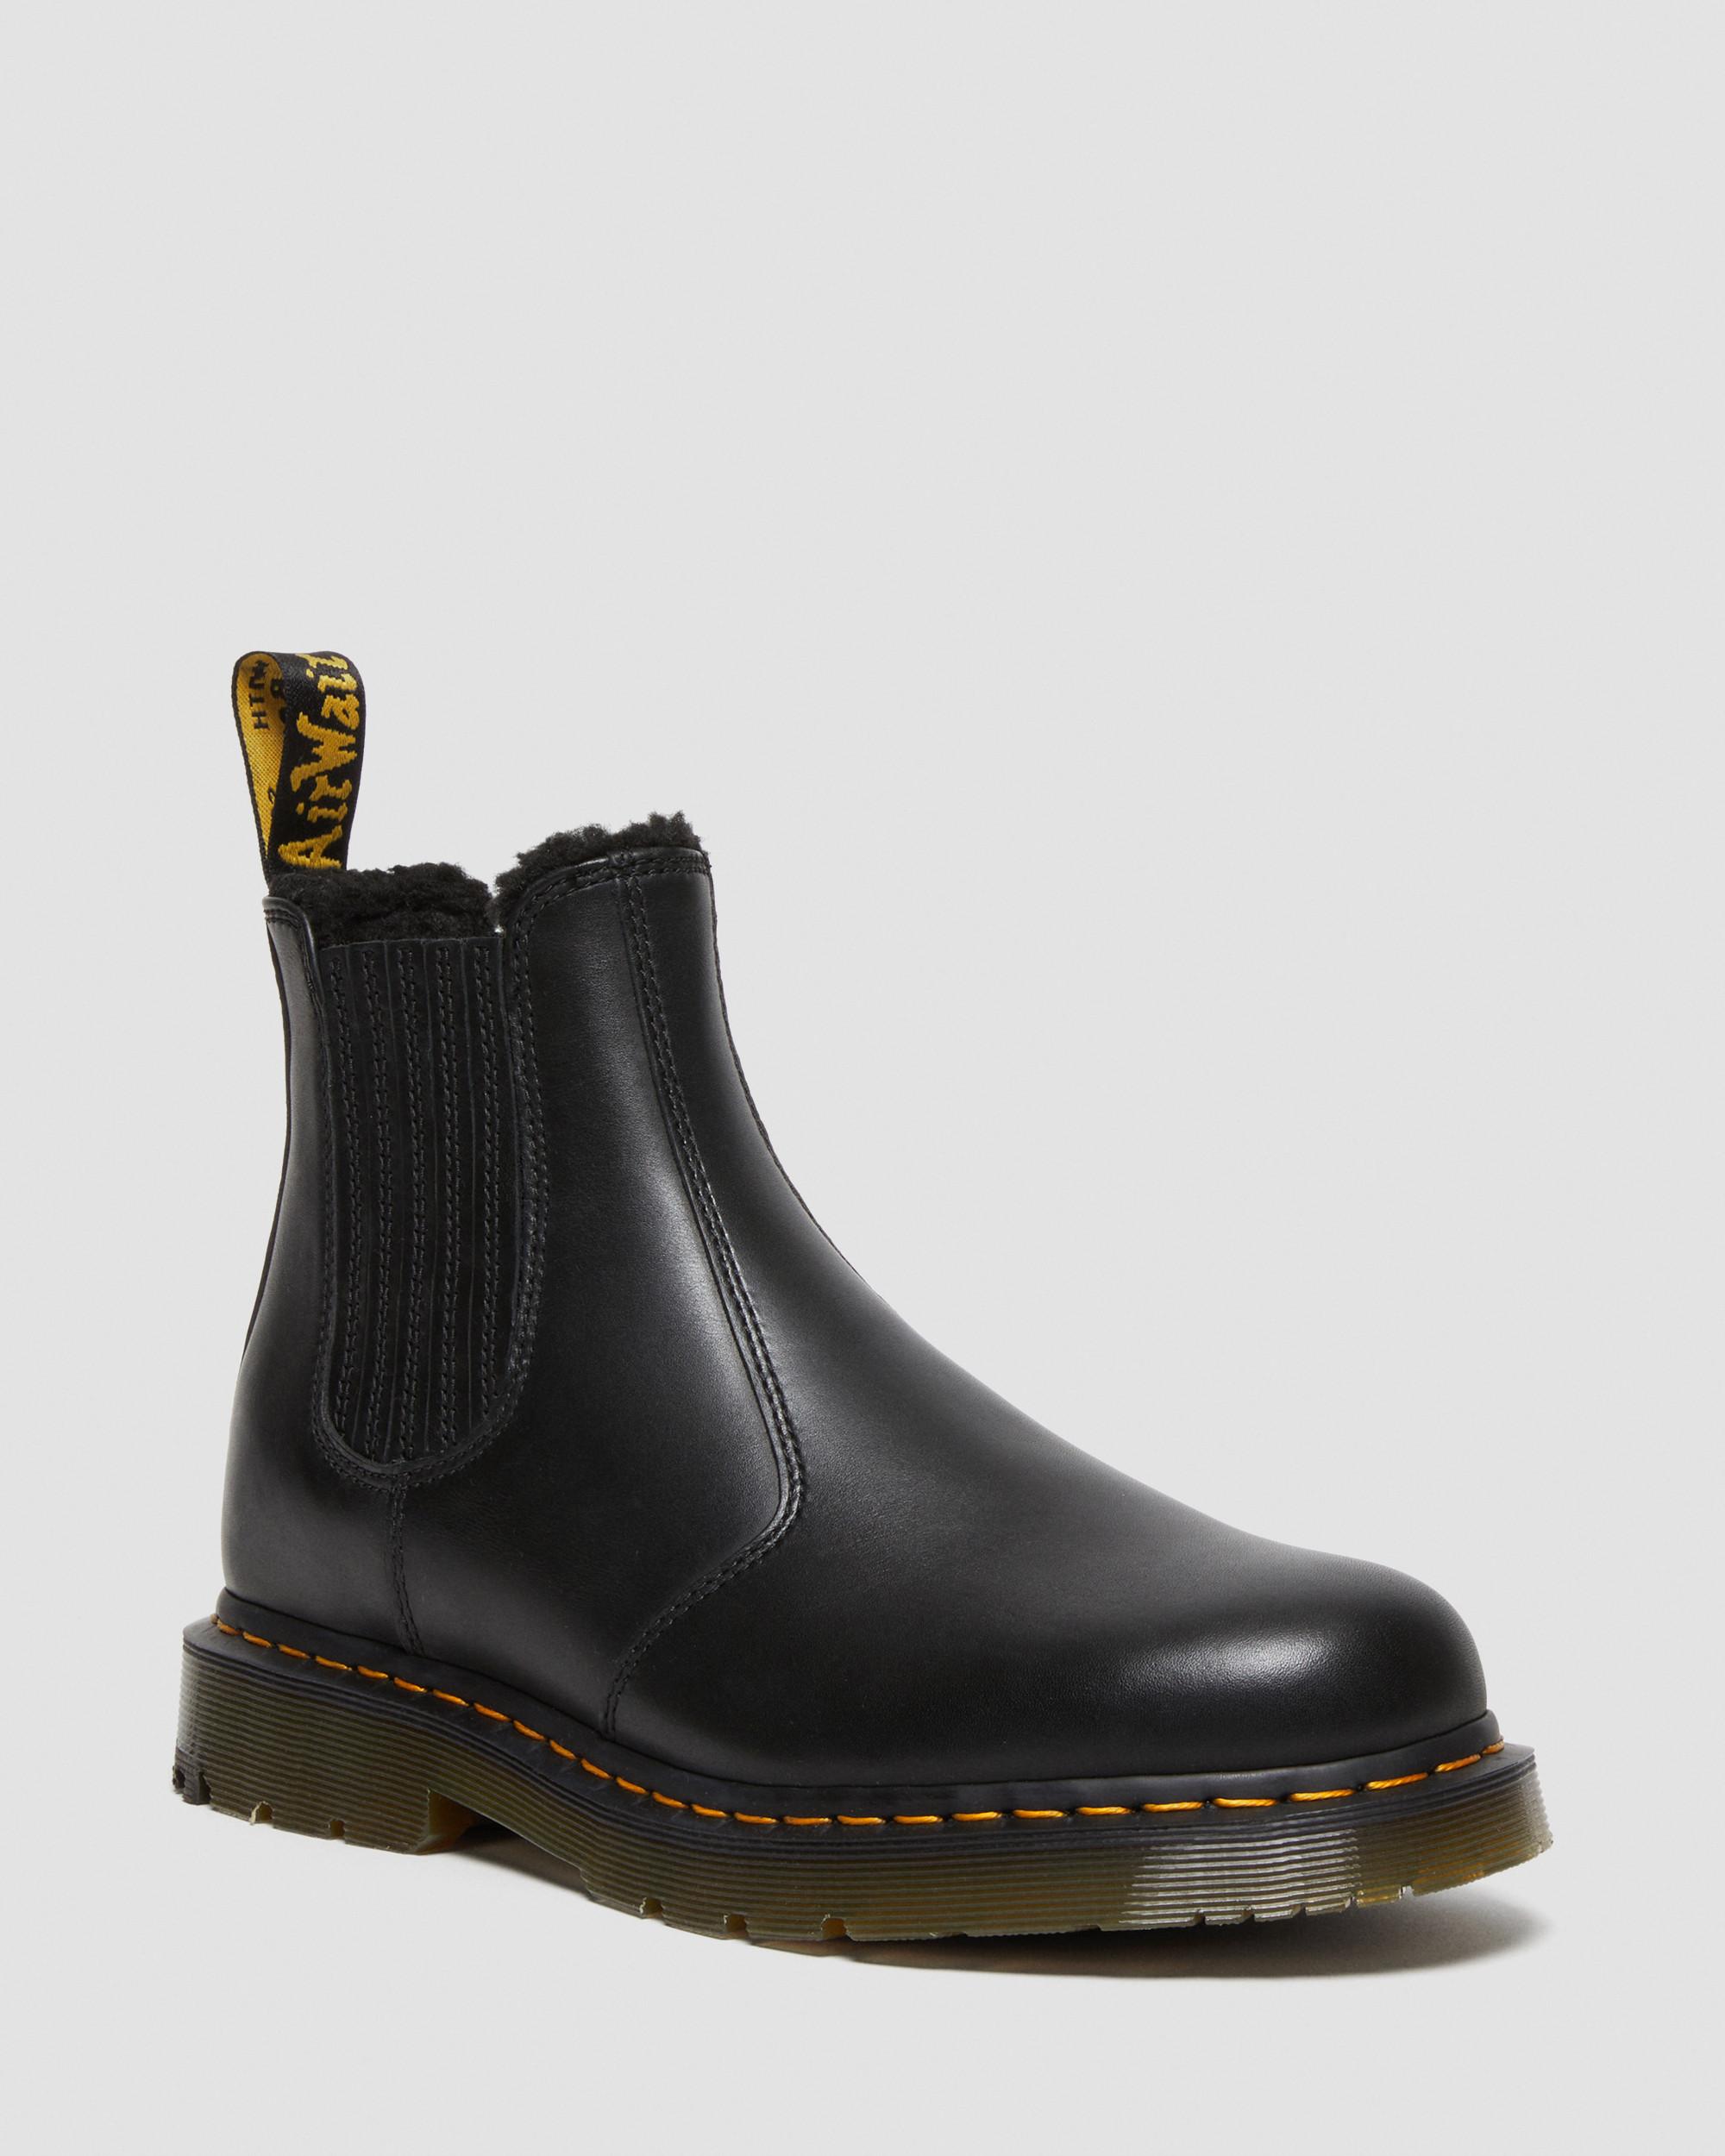 DR MARTENS 1460 Serena Faux Fur Lined Leather Lace Up Boots